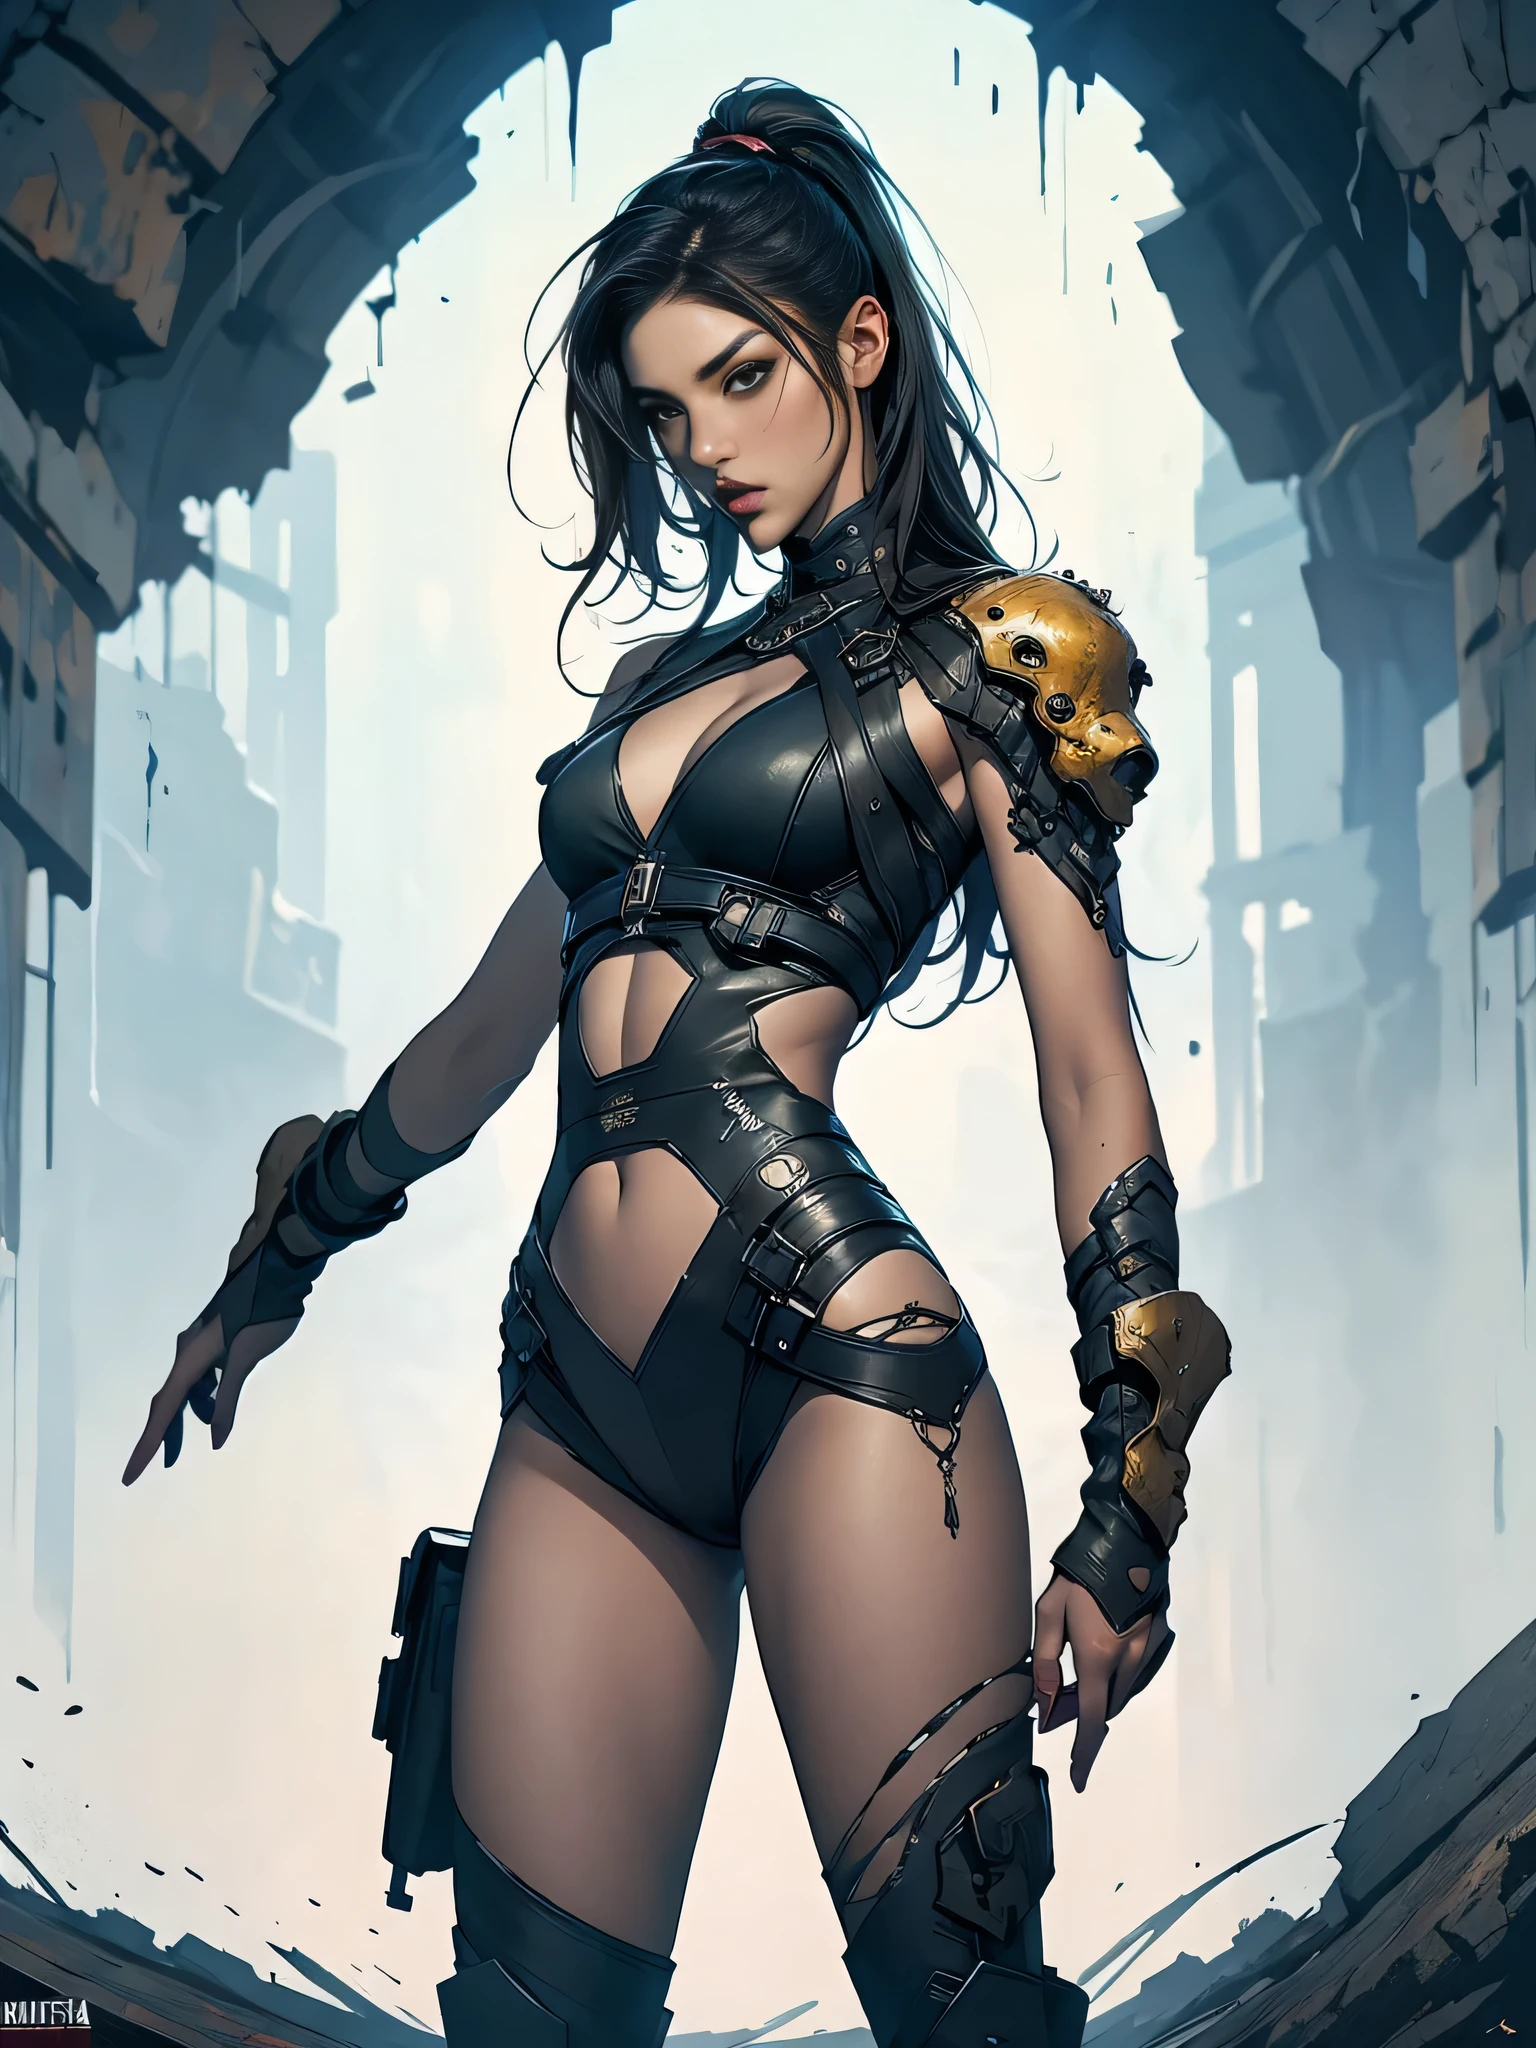 dark and torn, muscular body, fierce expression, holding a weapon, standing in a desolate wasteland, dramatic lighting, intense shadows, gritty texture, high contrast, vibrant colors, dynamic pose, powerful stance, rugged background, explosive atmosphere, dystopian theme, surreal elements, digitally painted illustration, HD resolution, intricate details, dramatic composition, edgy and chaotic brushstrokes, Gothic style, intense emotions, epic scale, raw and gritty feel, captivating and provocative artwork. (colores, calidos, anaranjado, amarillo, violeta:1.3)